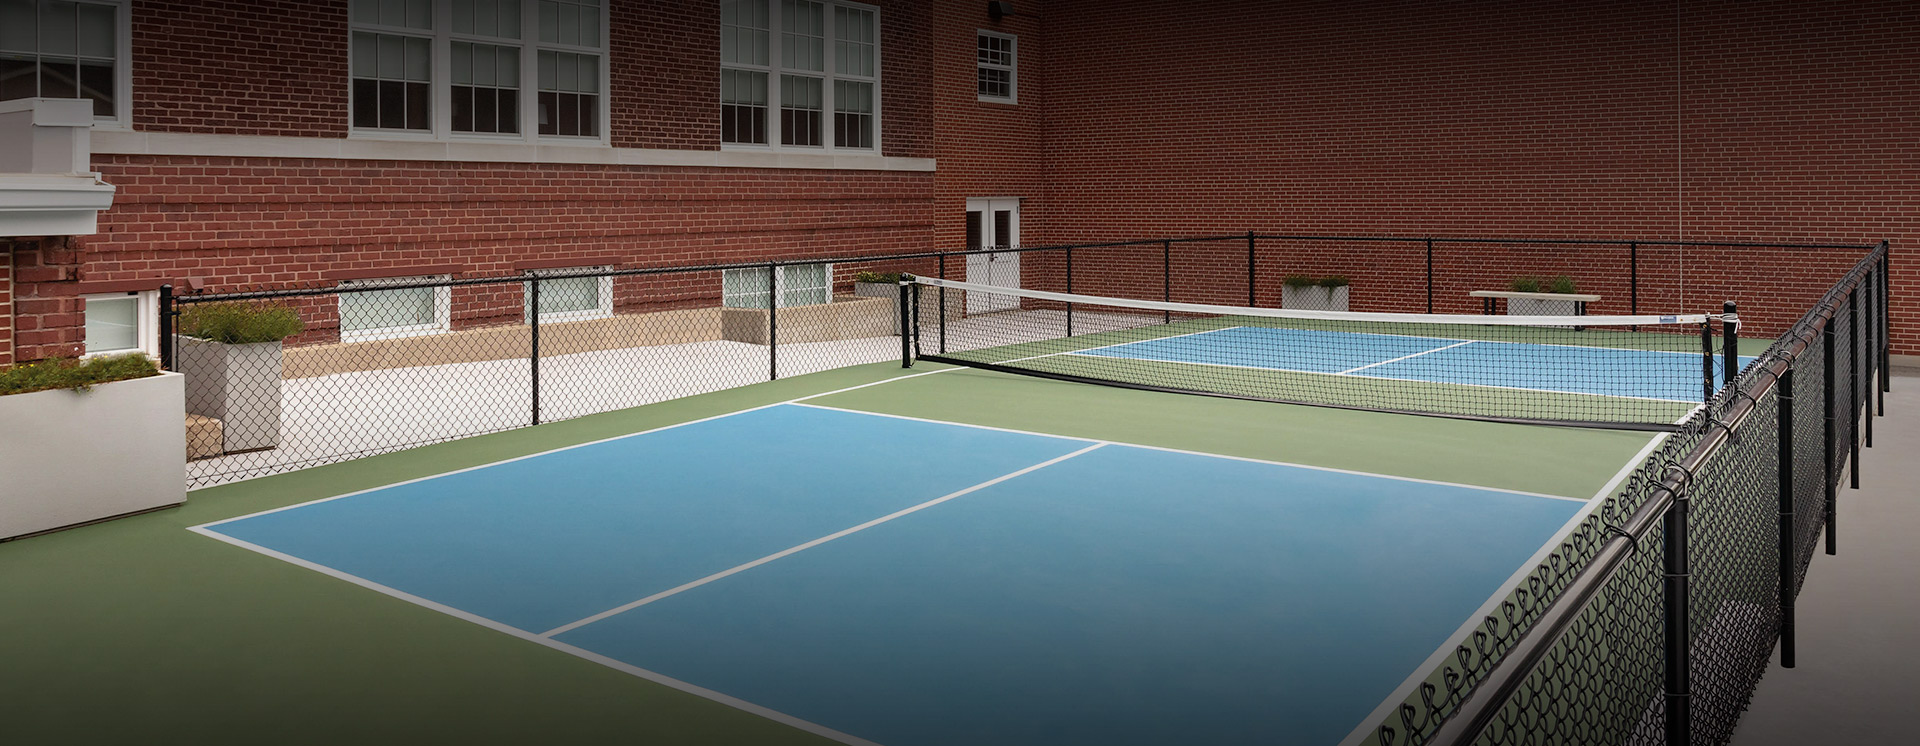 a view of the tennis court